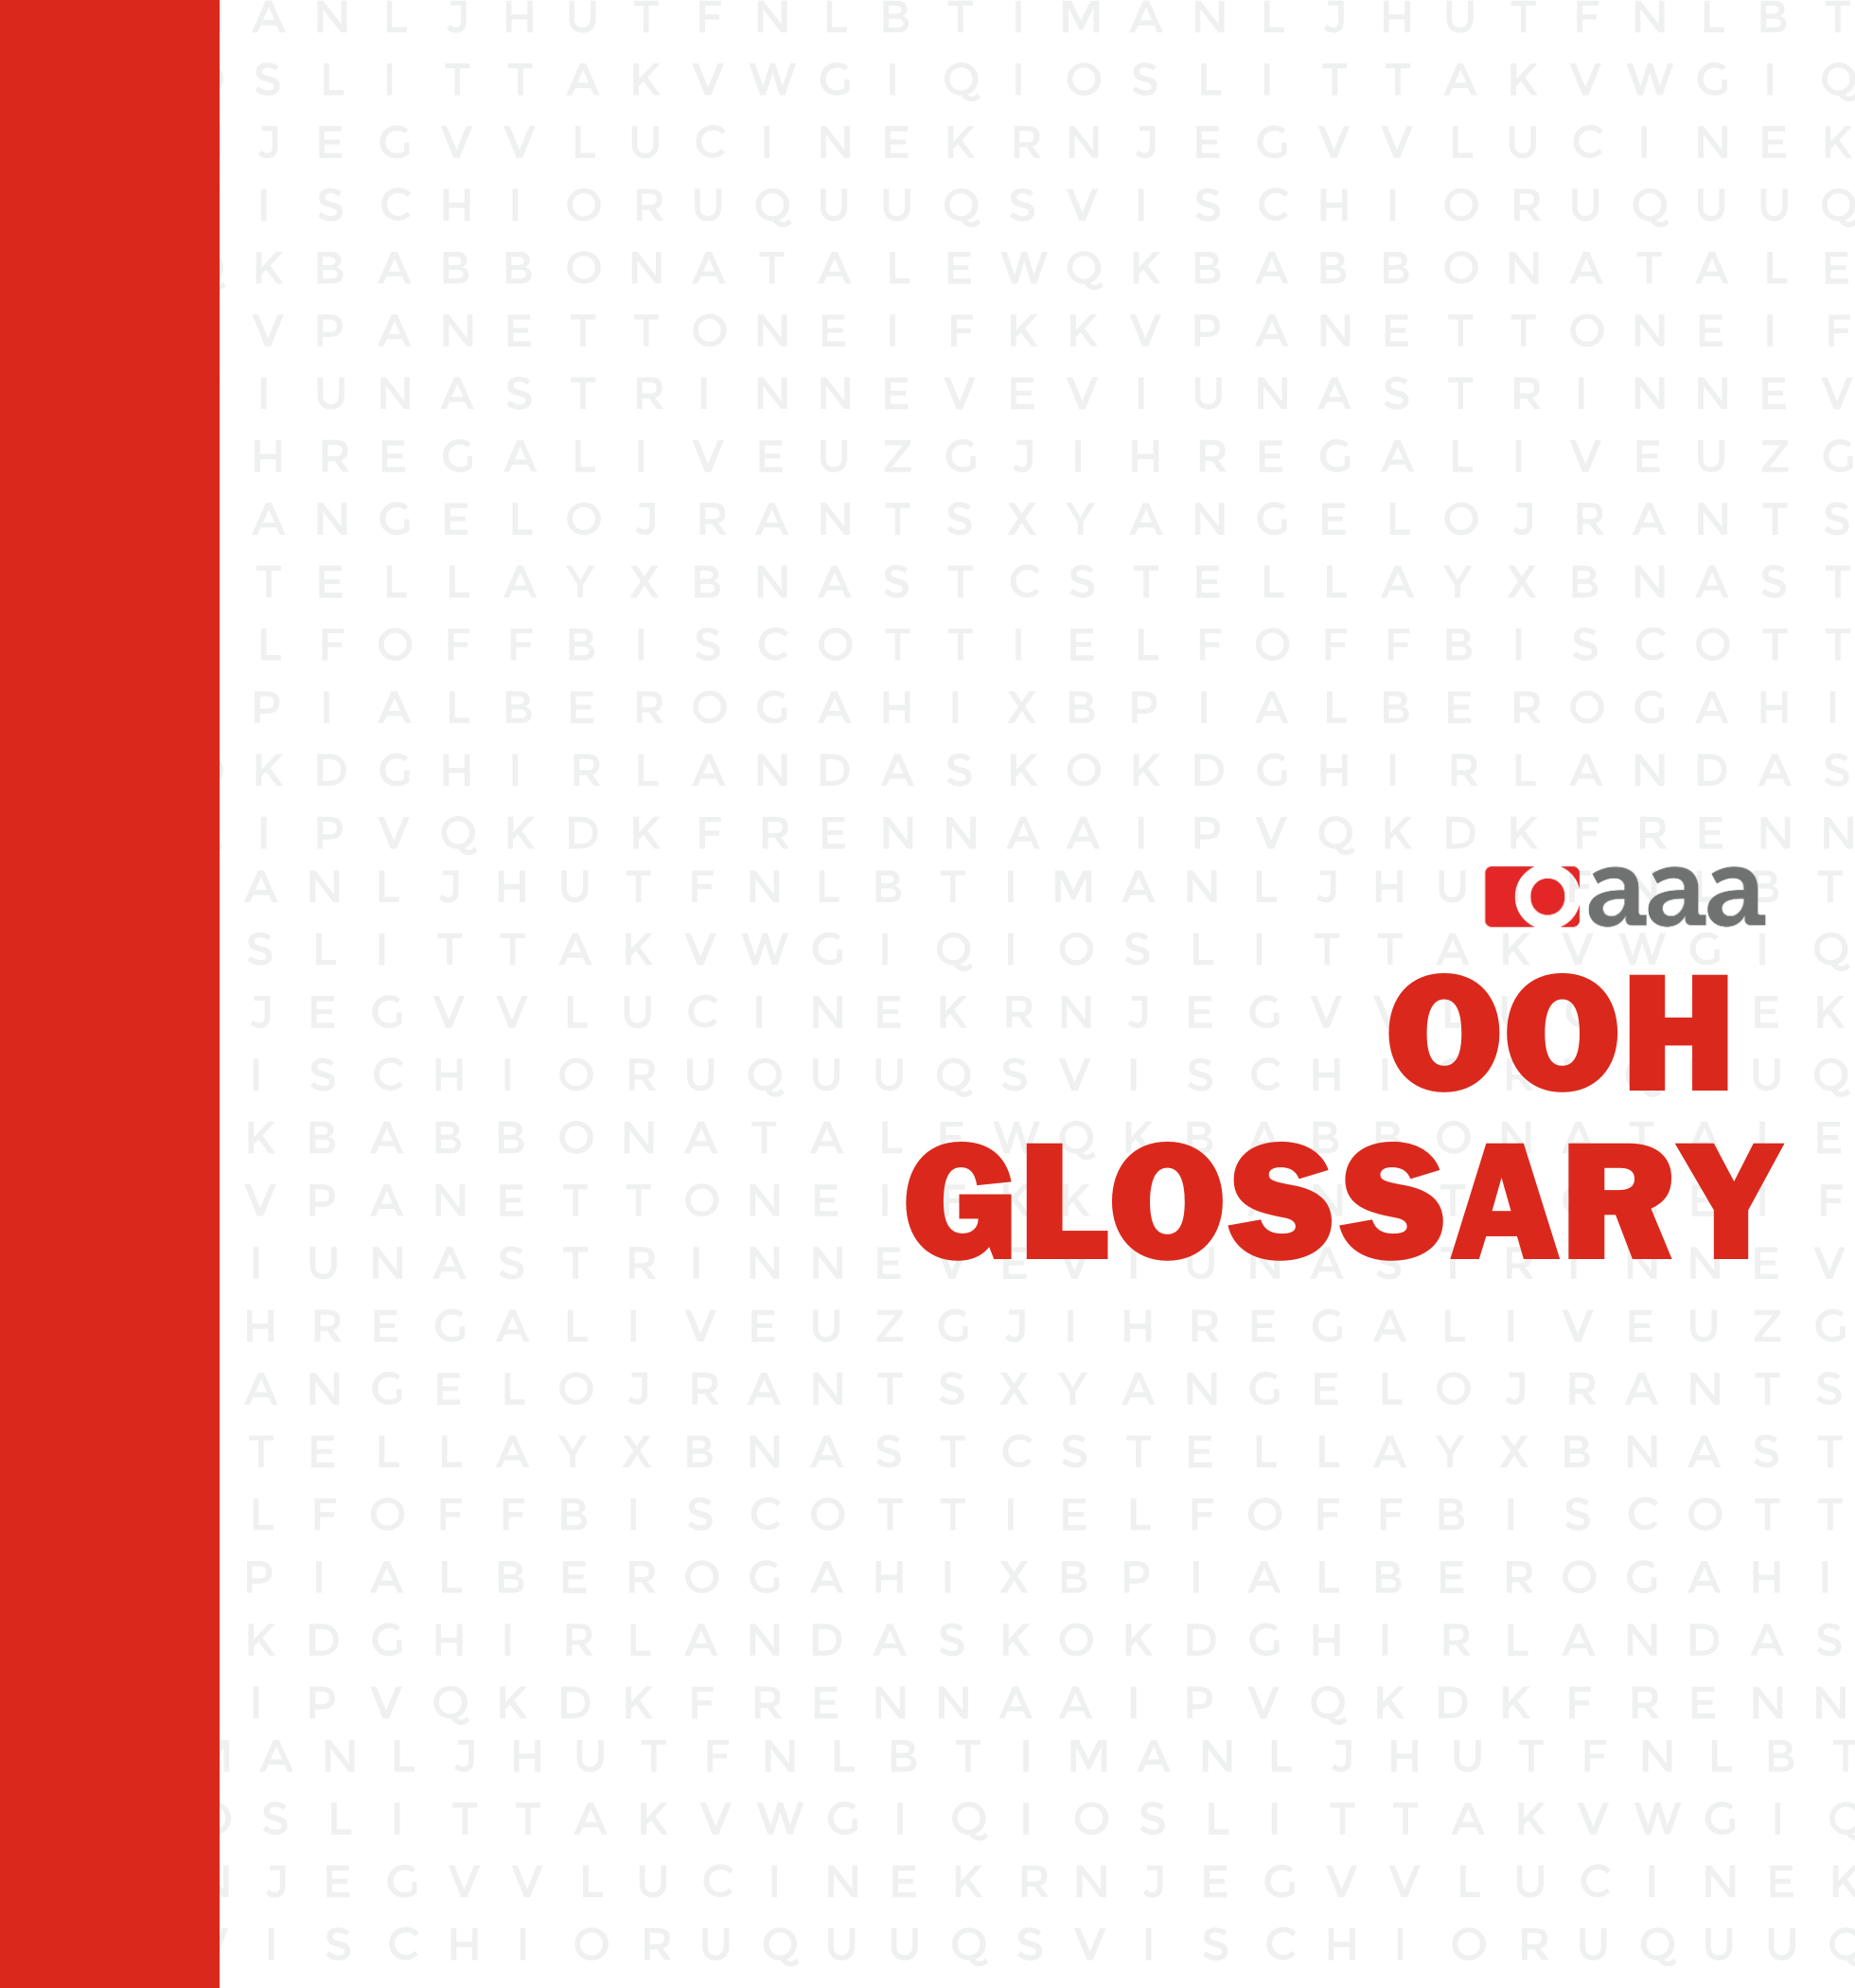 OOH Glossary of Terms